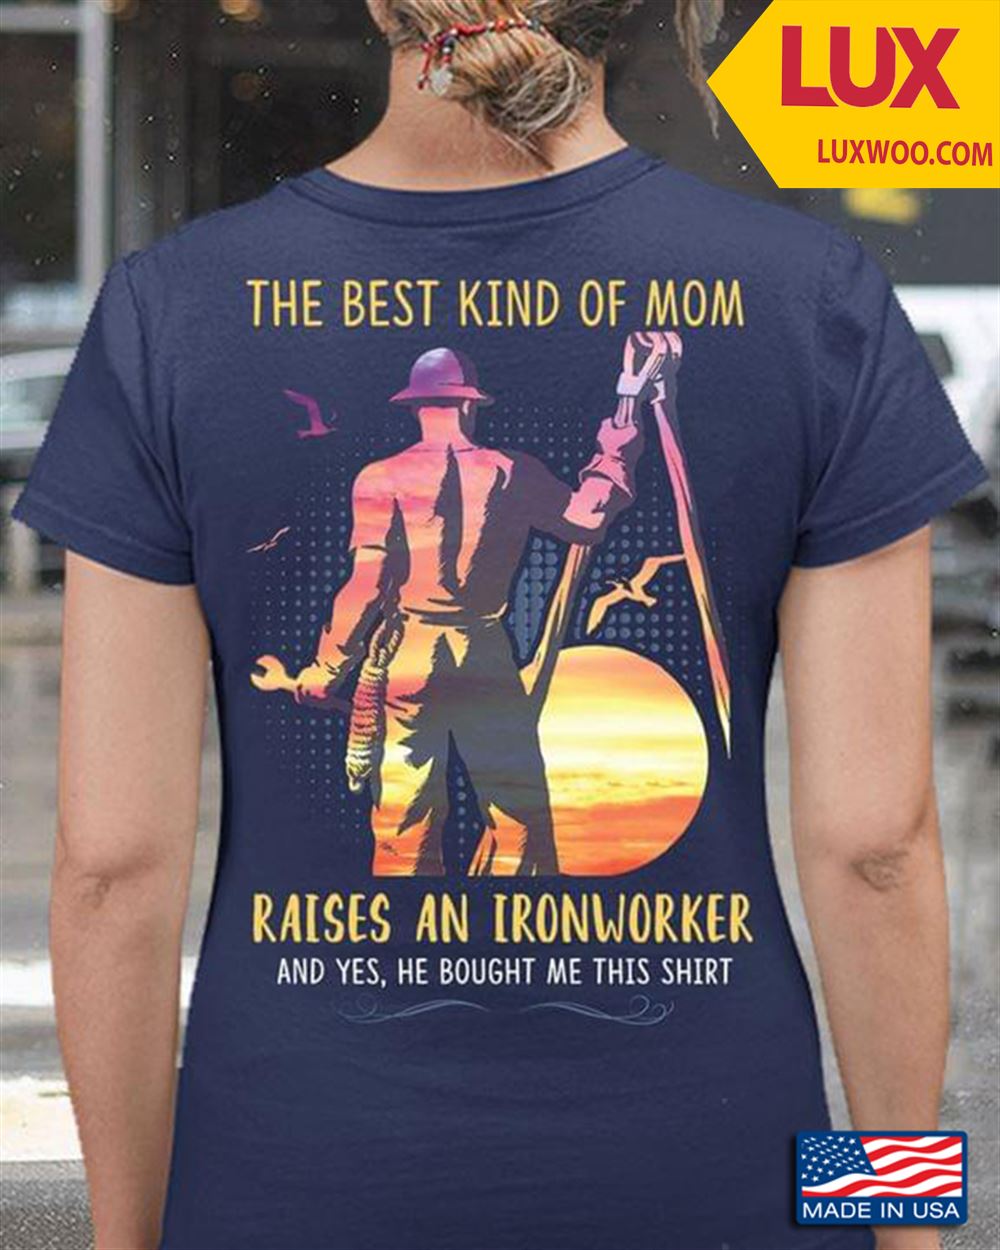 The Best Kind Of Mom Raises An Ironworker And Yes He Bought Me This Shirt Tshirt Size Up To 5xl